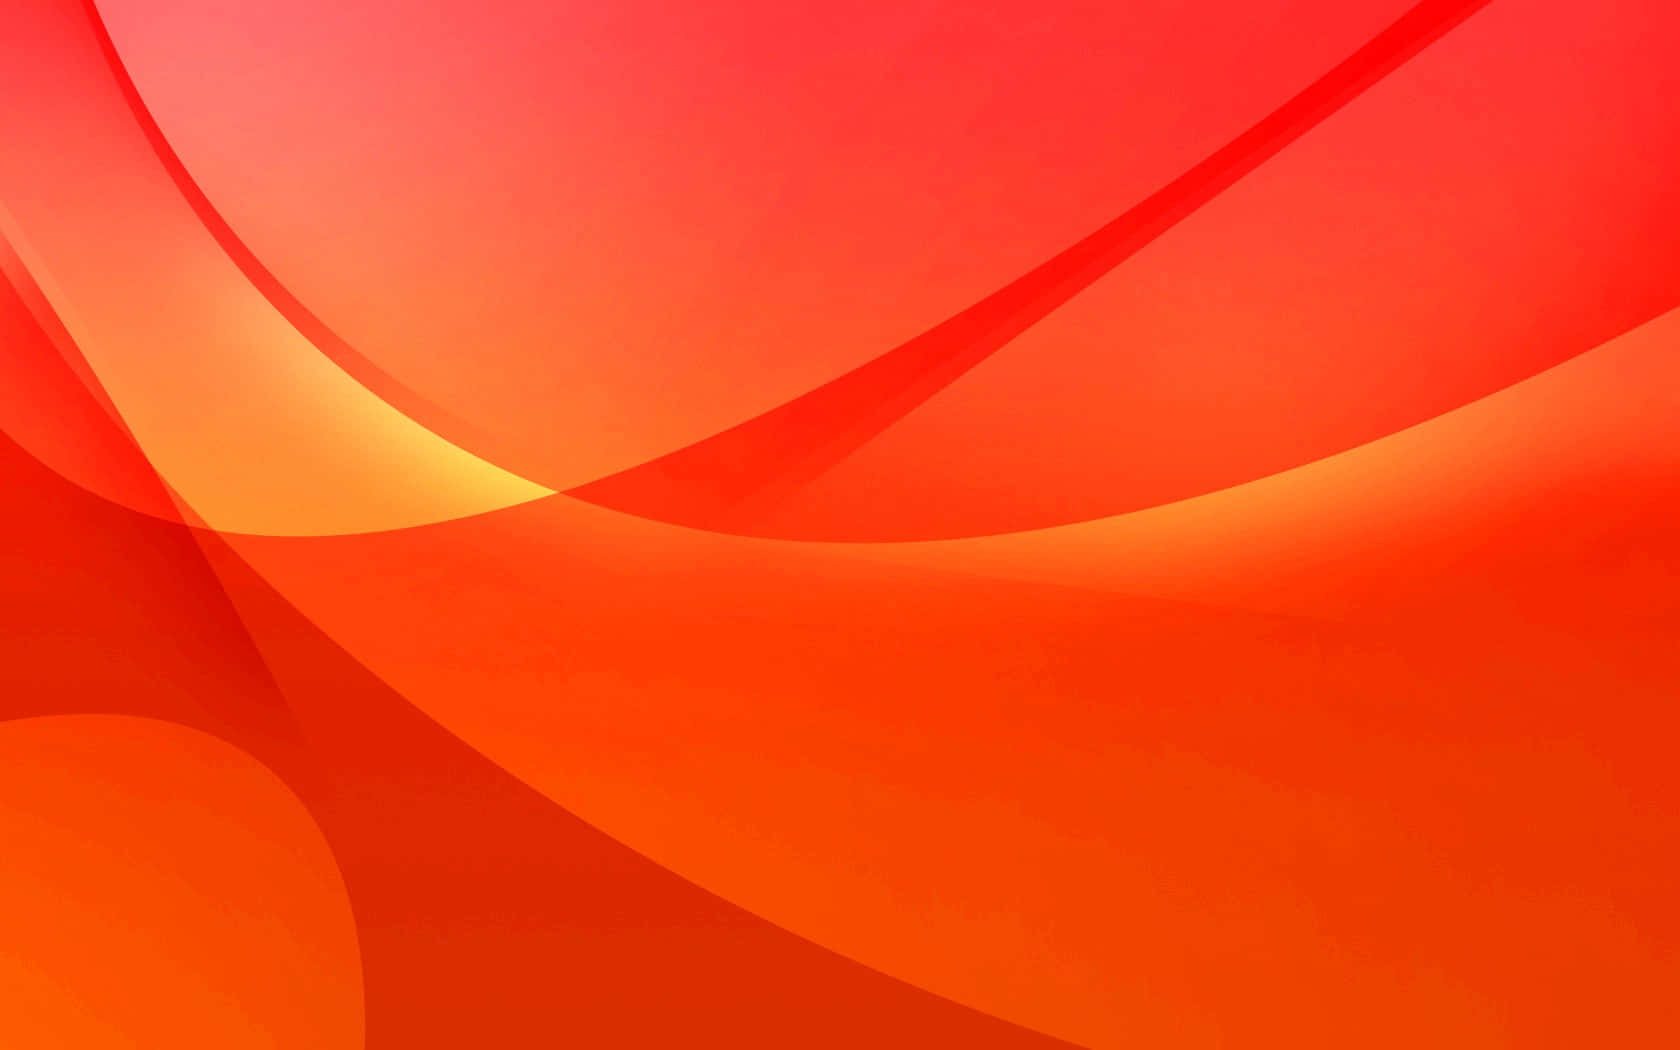 An Orange And Red Abstract Background